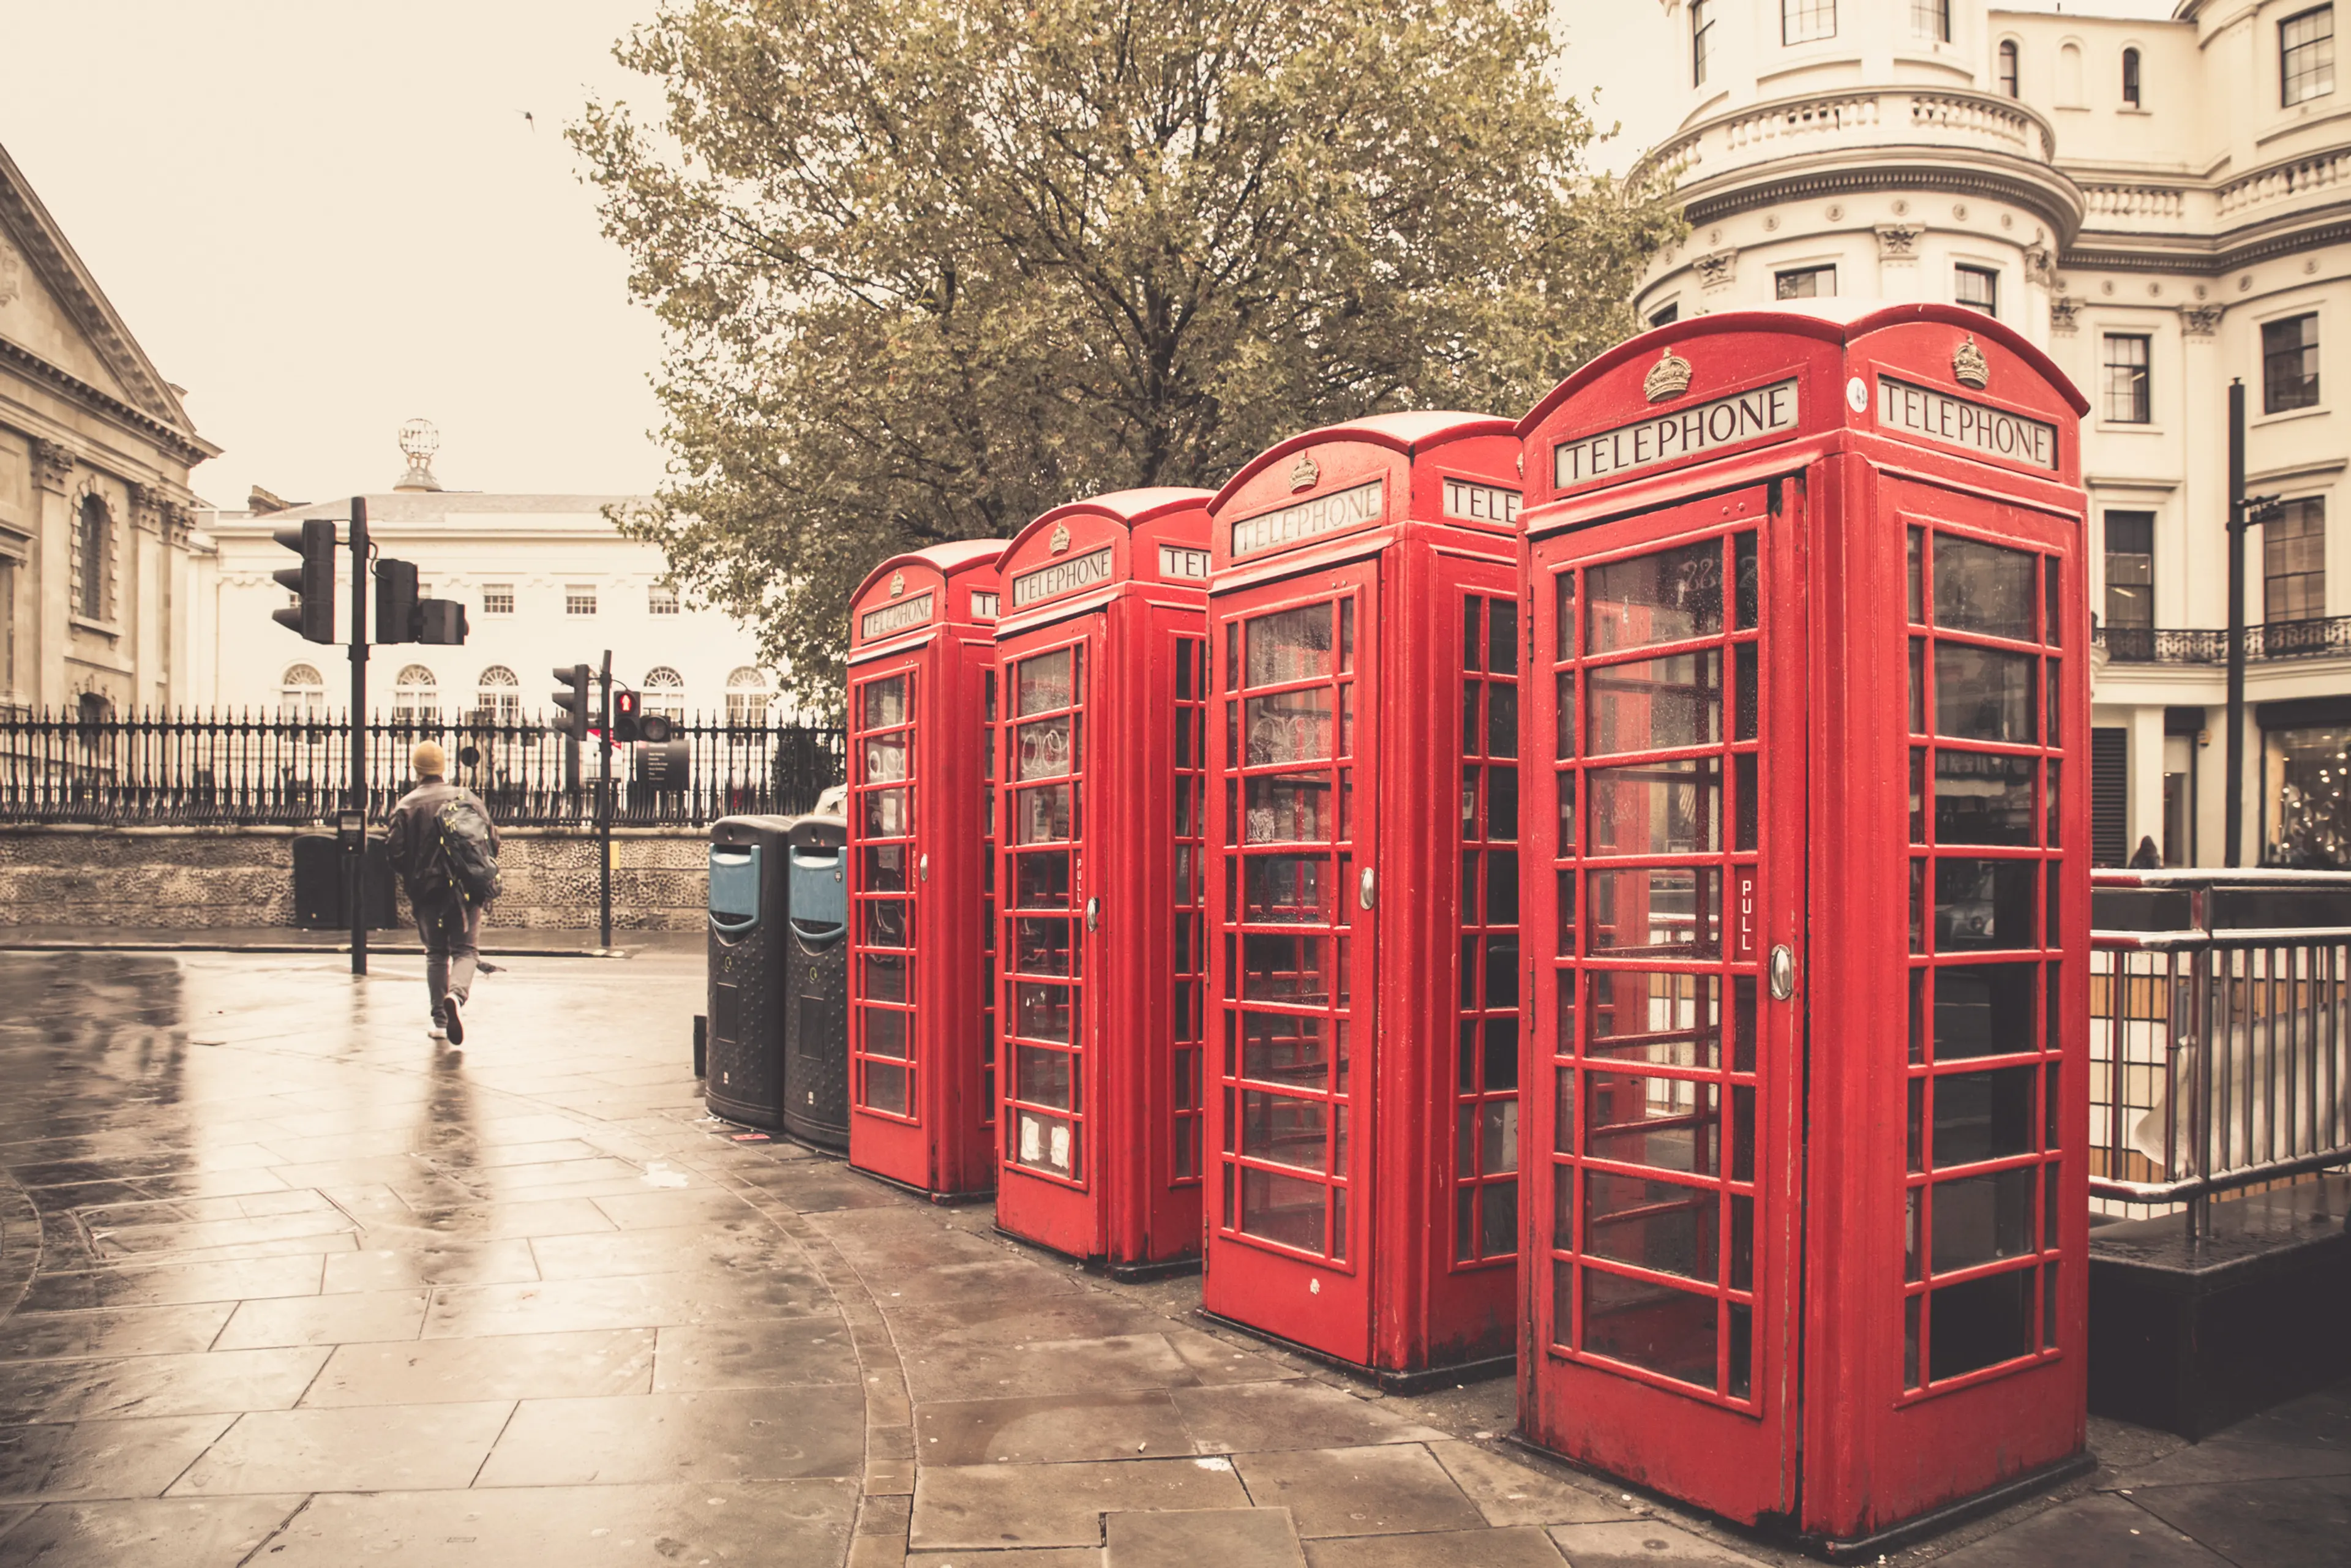 Vintage style red telephone booths